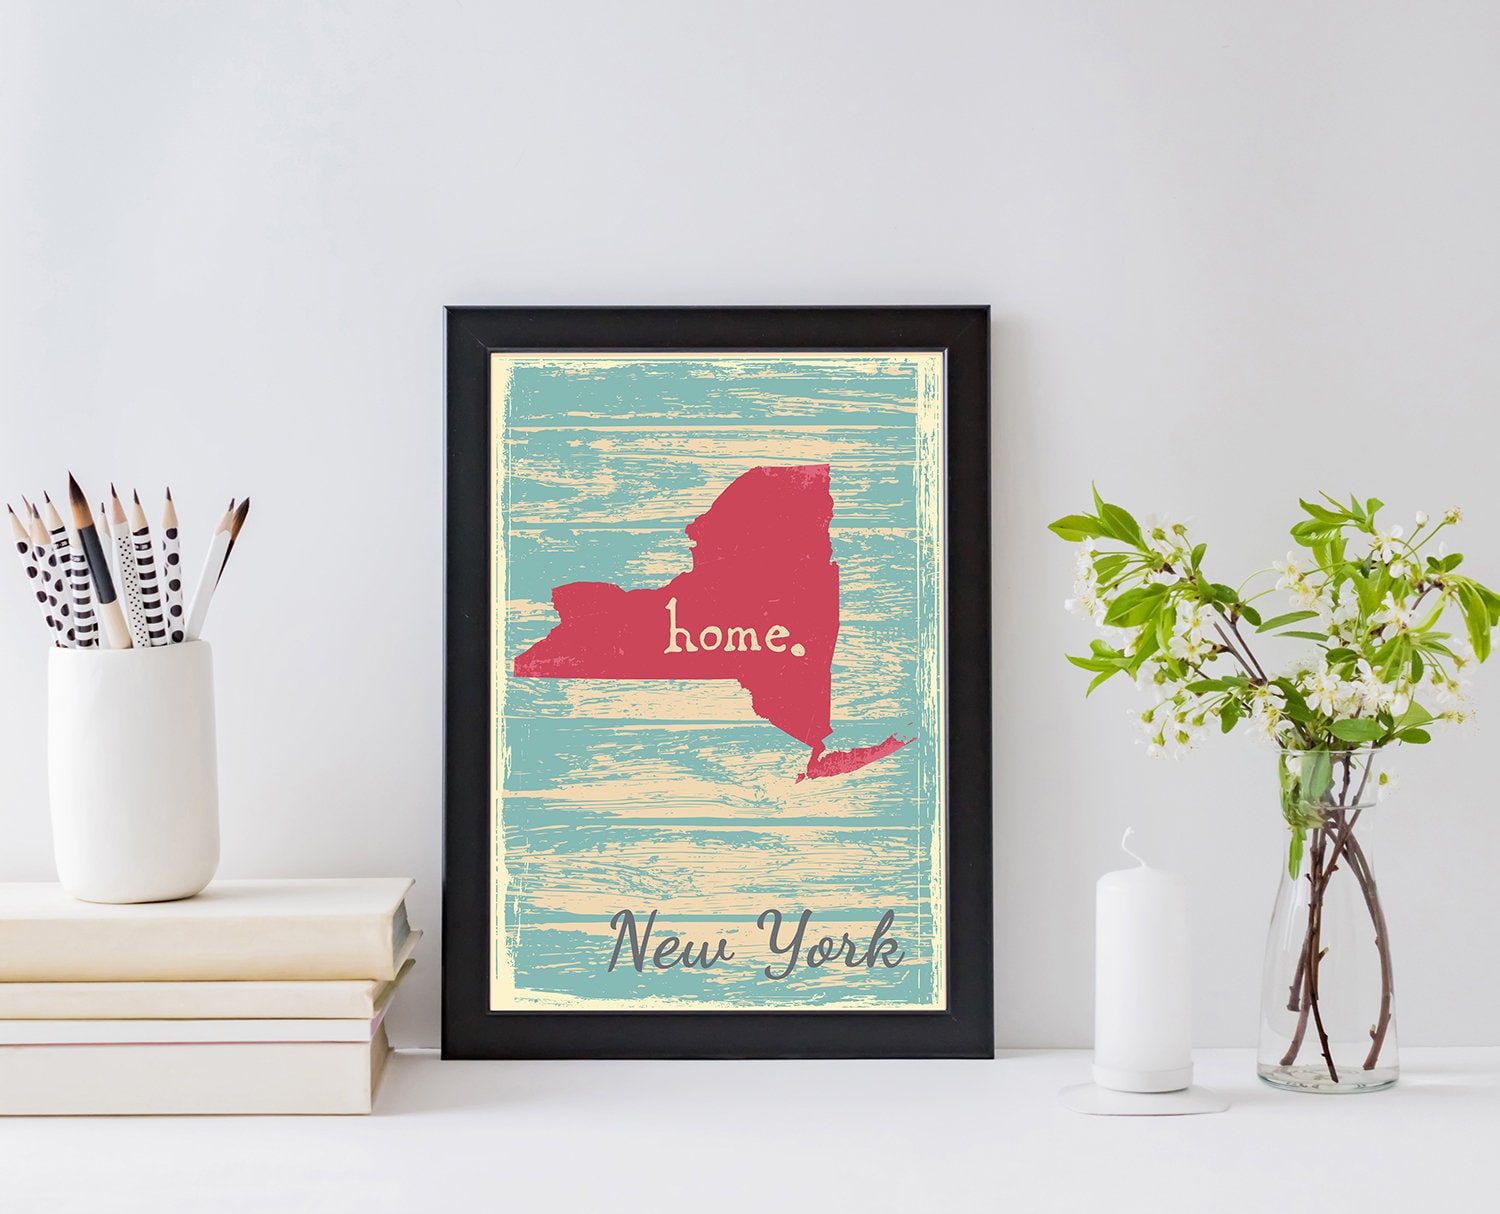 Retro Style Travel Poster, New York Vintage State Poster Printing, Home Wall Art, Office Wall  Decor, Poster Prints, New York State Poster